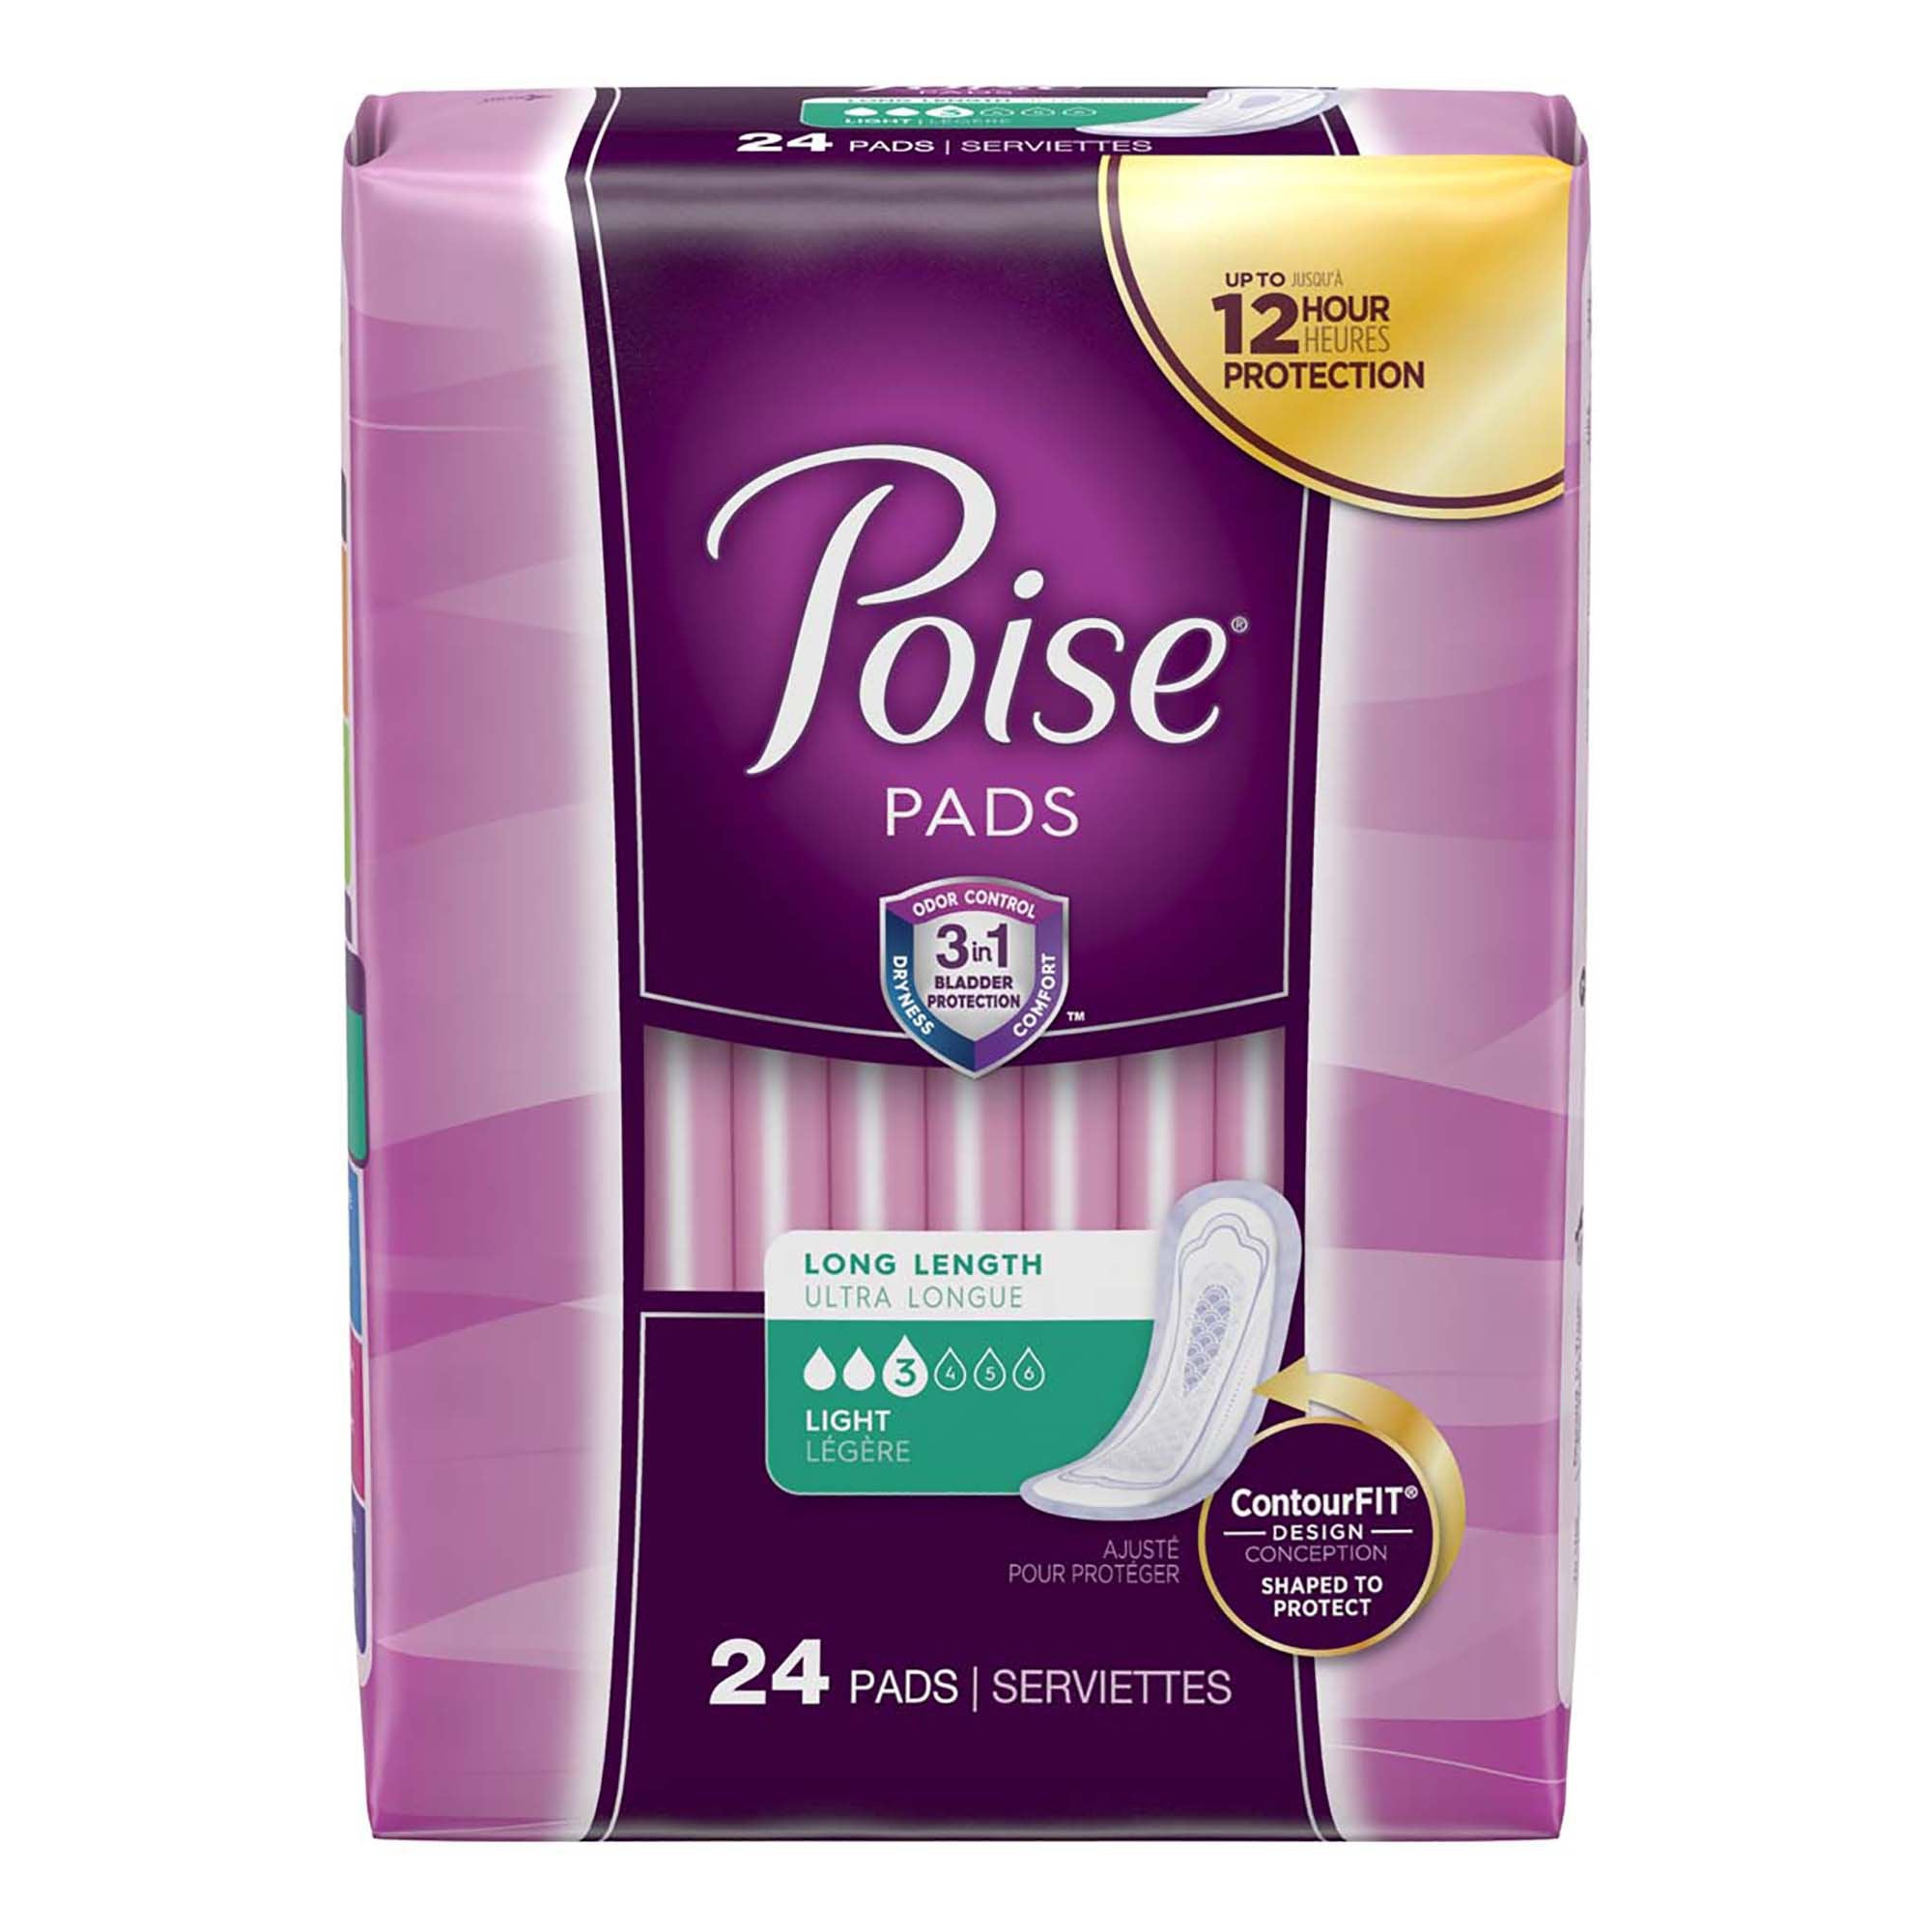 Poise Bladder Control Pad, Long, Light Absorbency, Disposable, Absorb-Loc Core, Female, One Size Fits Most (96 Units)